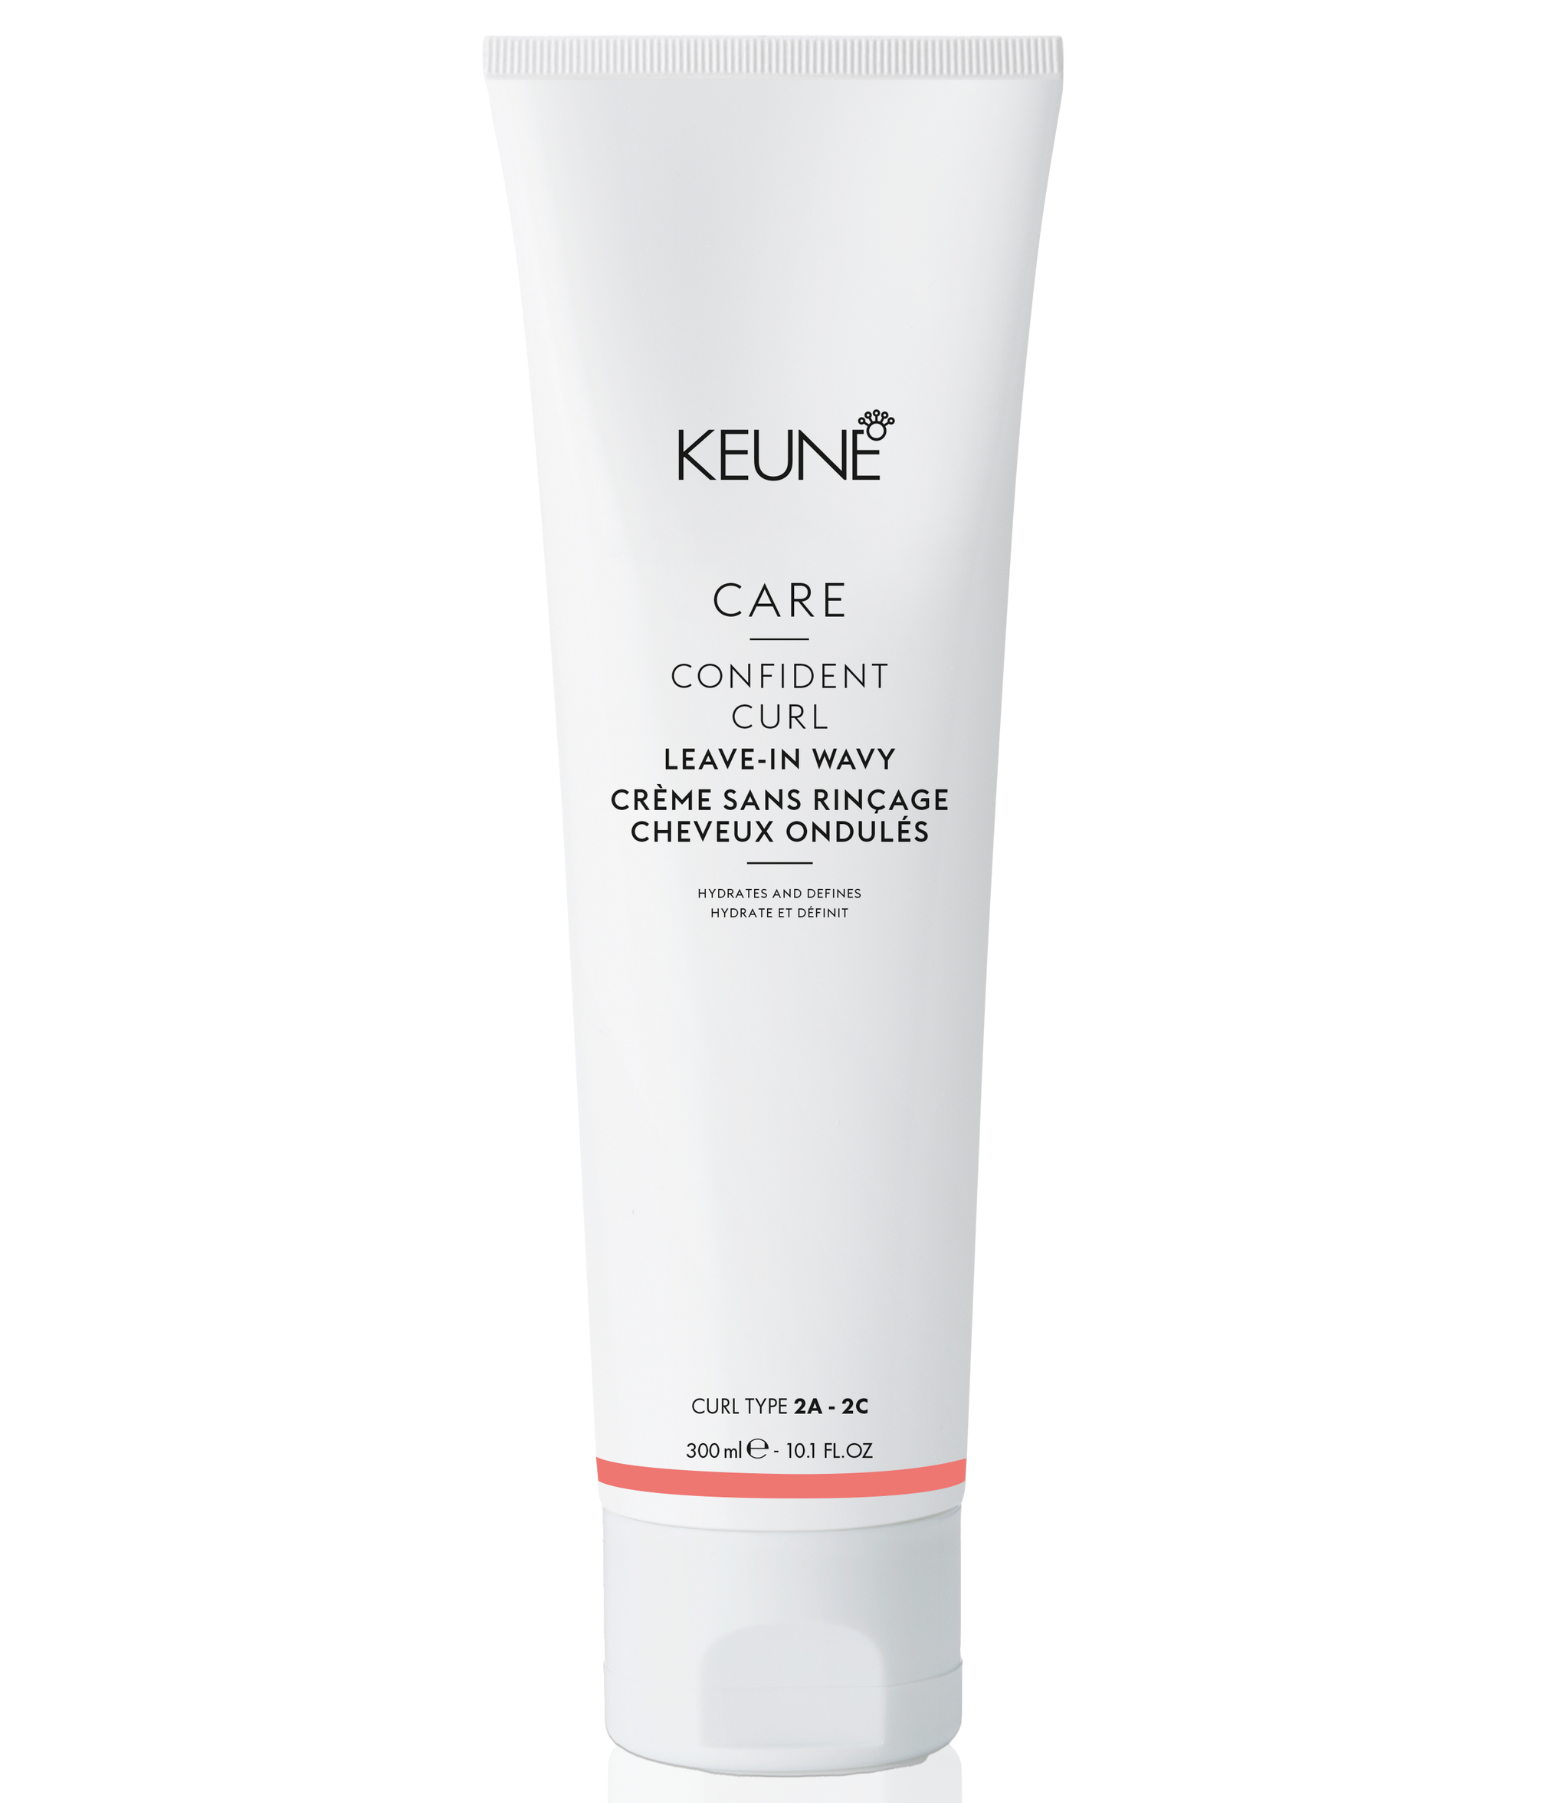 CARE Confident Curl Leave-in Wavy is s lightweight leave-in curl crem will redefine your waves, reducing frizz and providing a light hold. Top curly hair products on keune.ch.